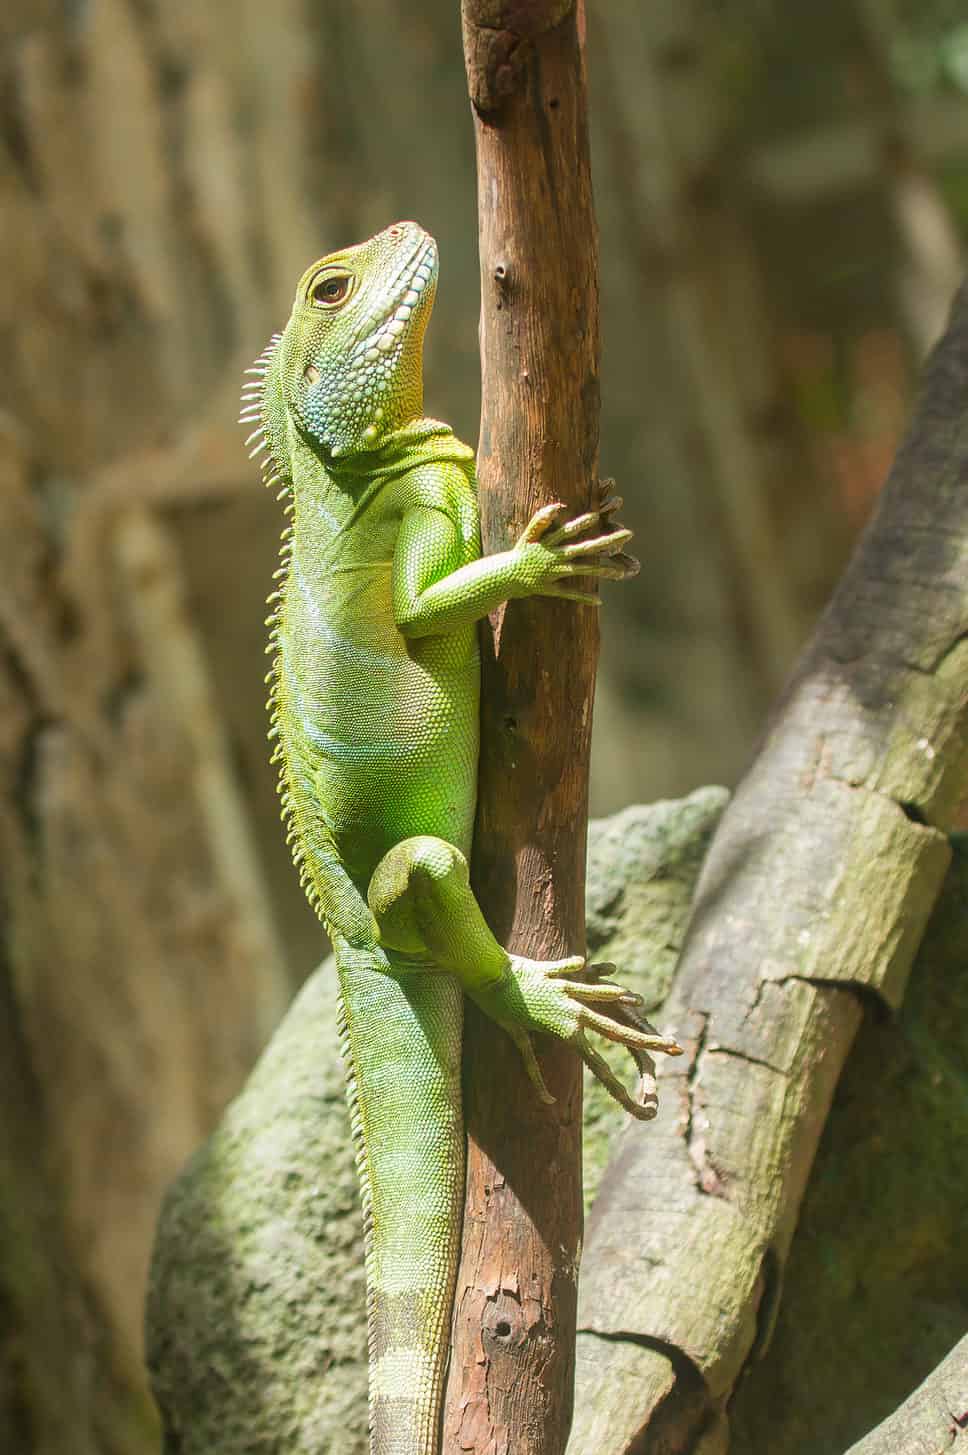 Iguana in a tree at a zoo in Vietnam